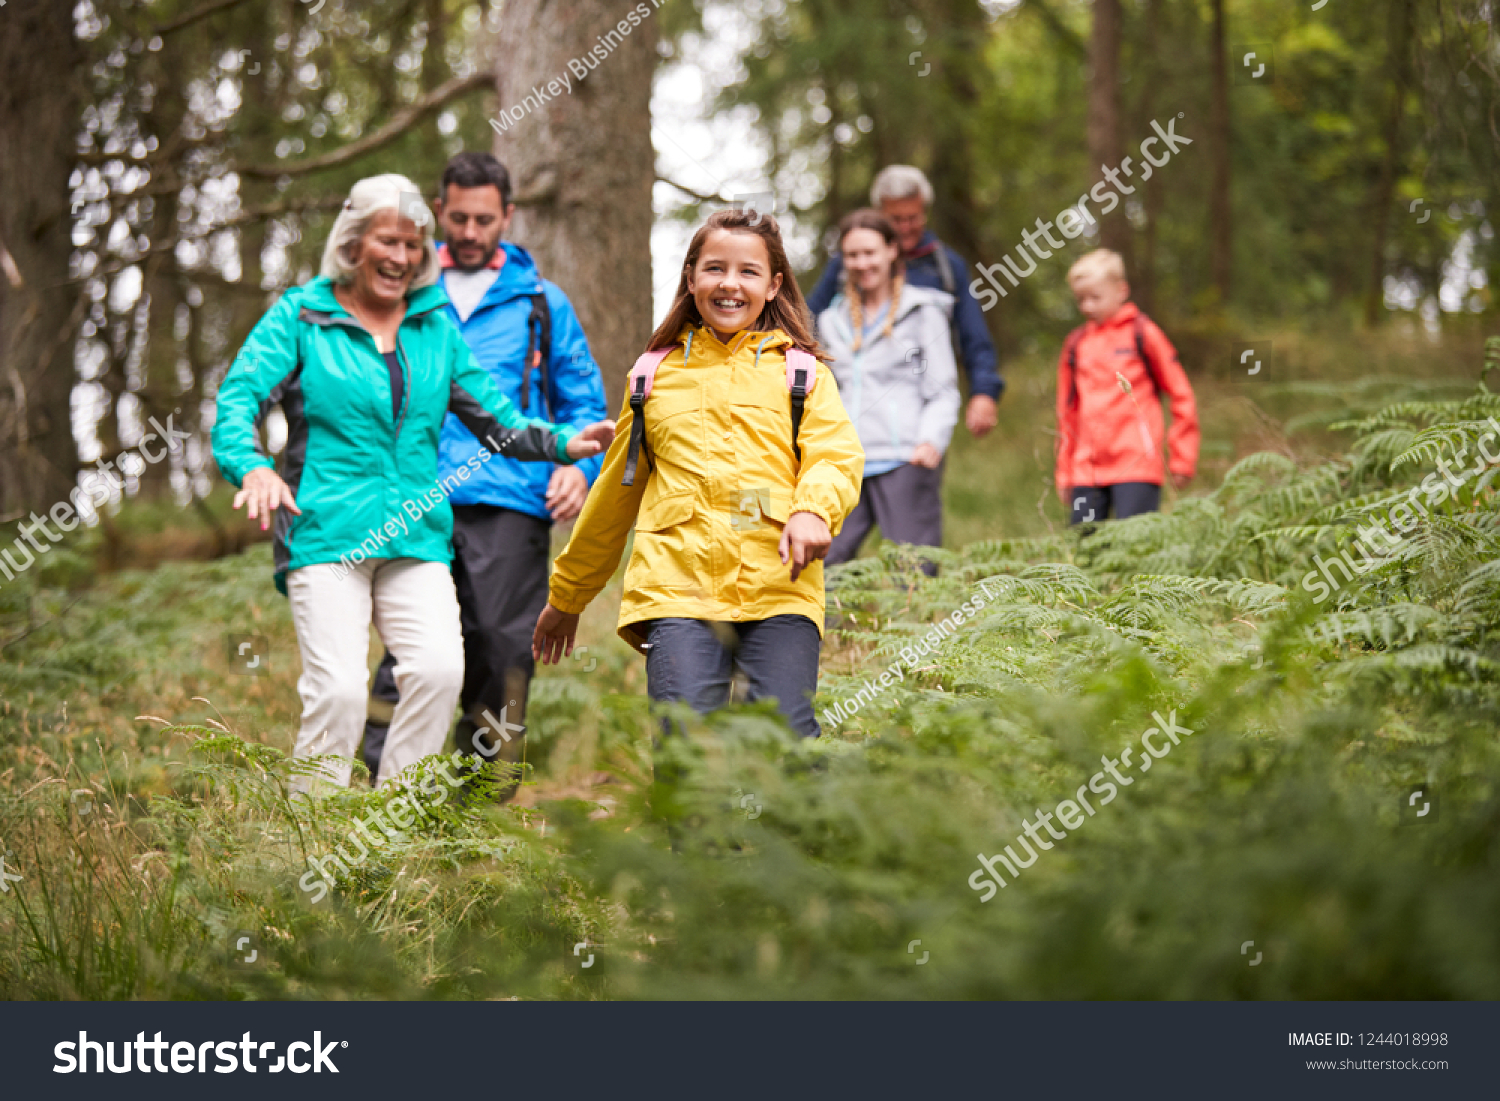 Multi generation family walking downhill on a trail in a forest during a camping holiday, Lake District, UK #1244018998